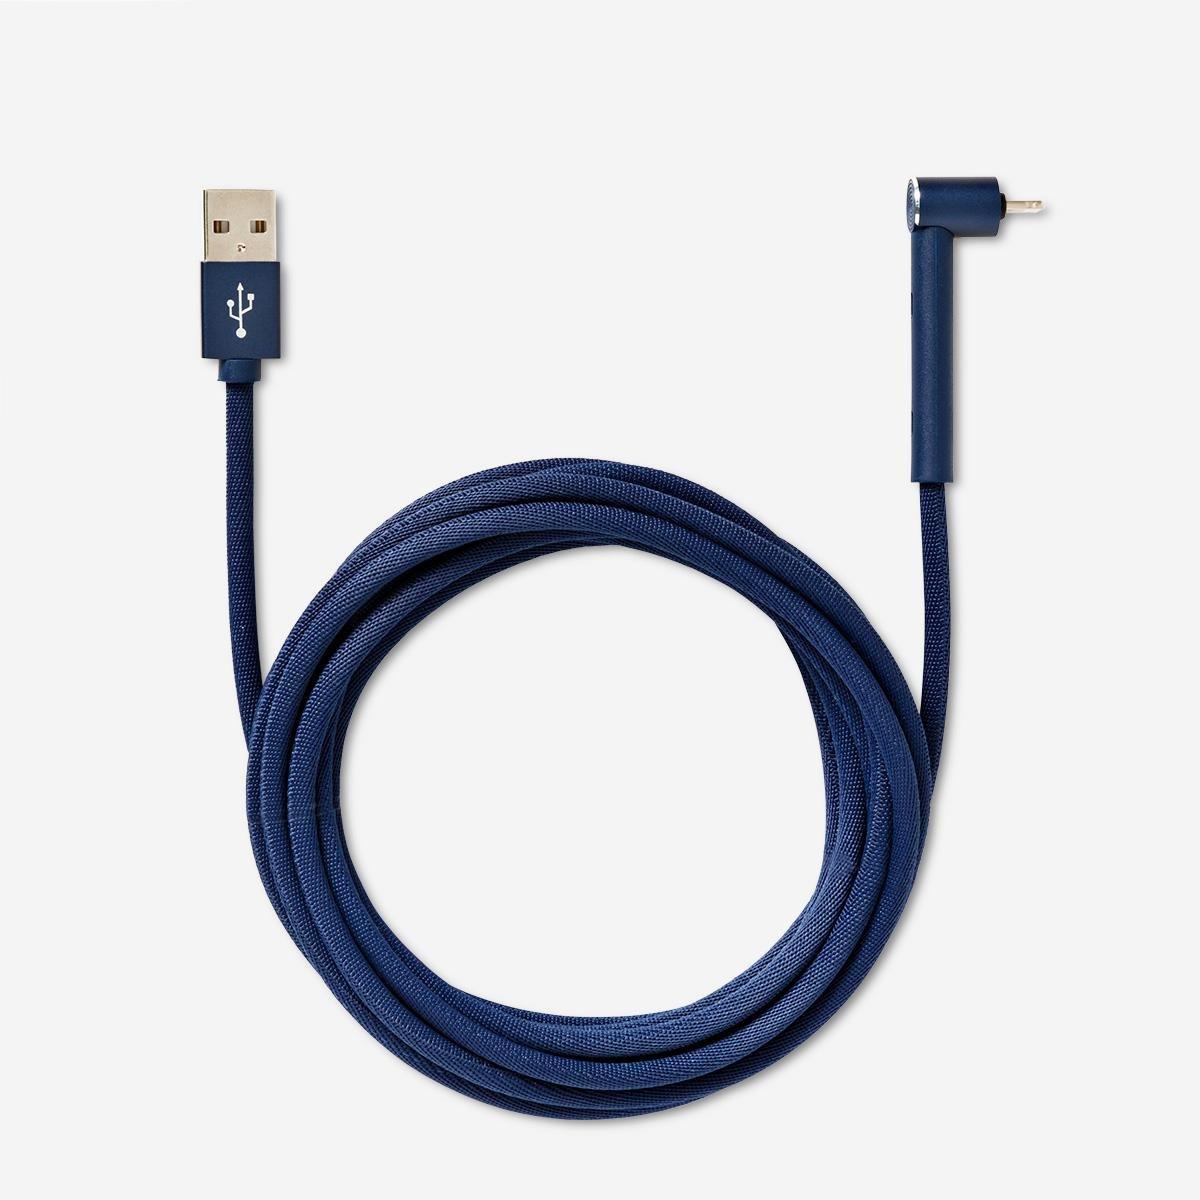 Blue usb charging cable with holder. fits iphone